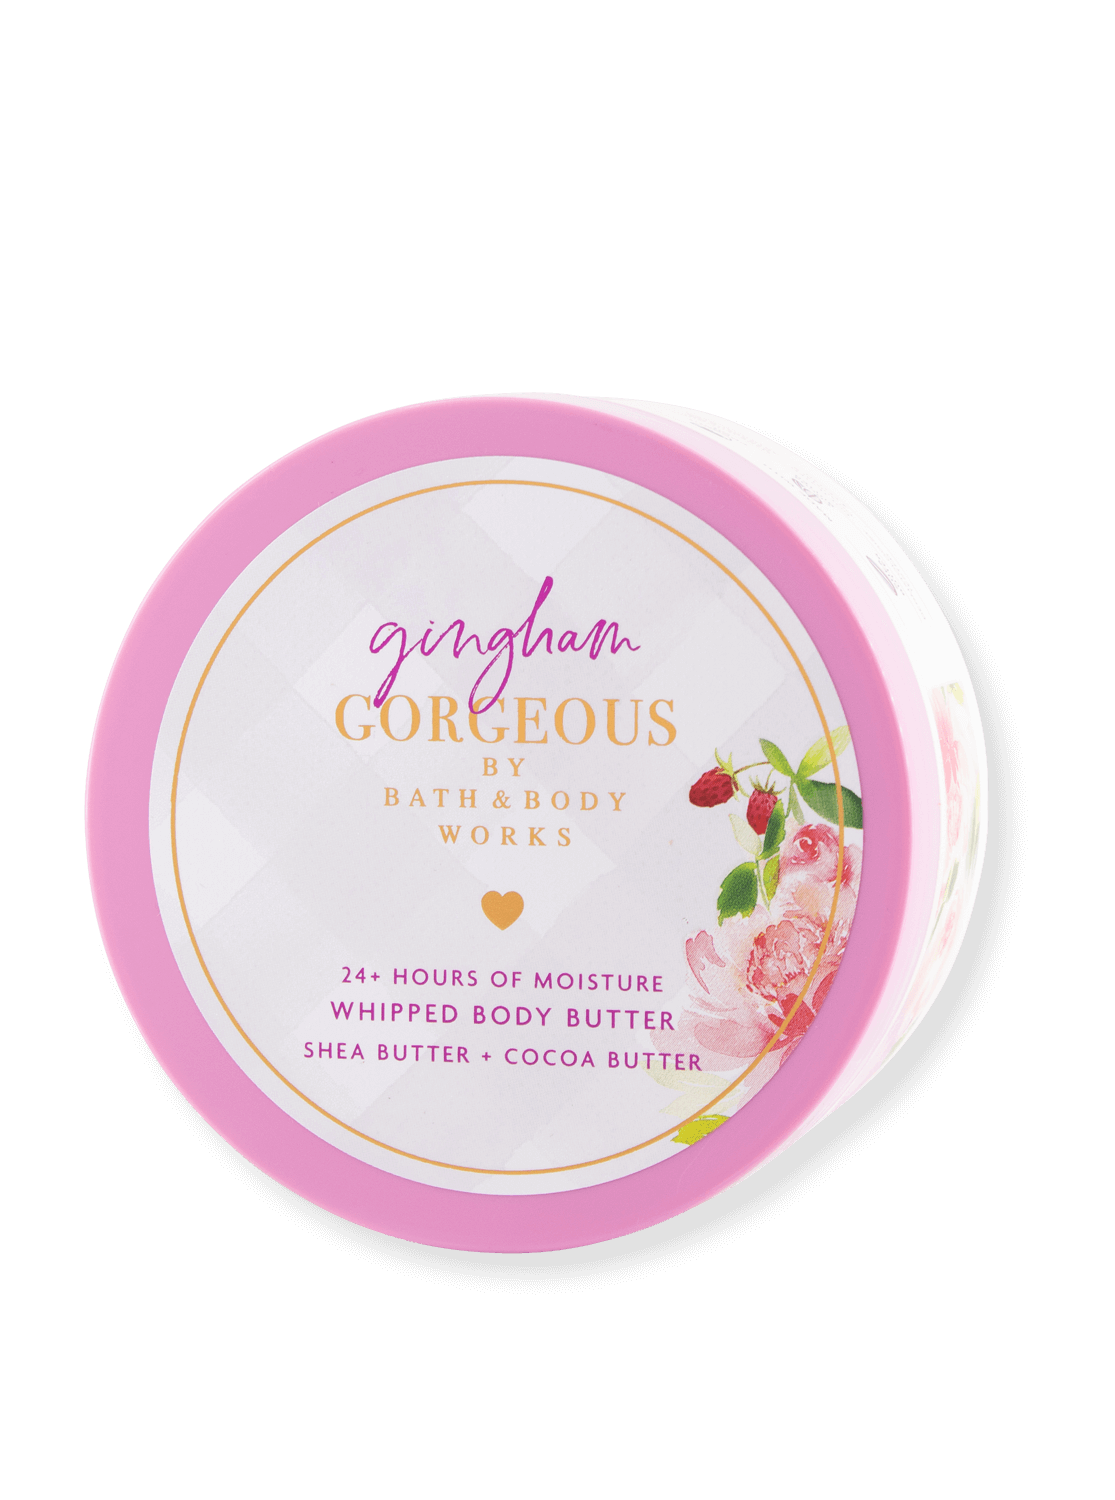 Whipped Body Butter - Gingham Gorgeous - 185g